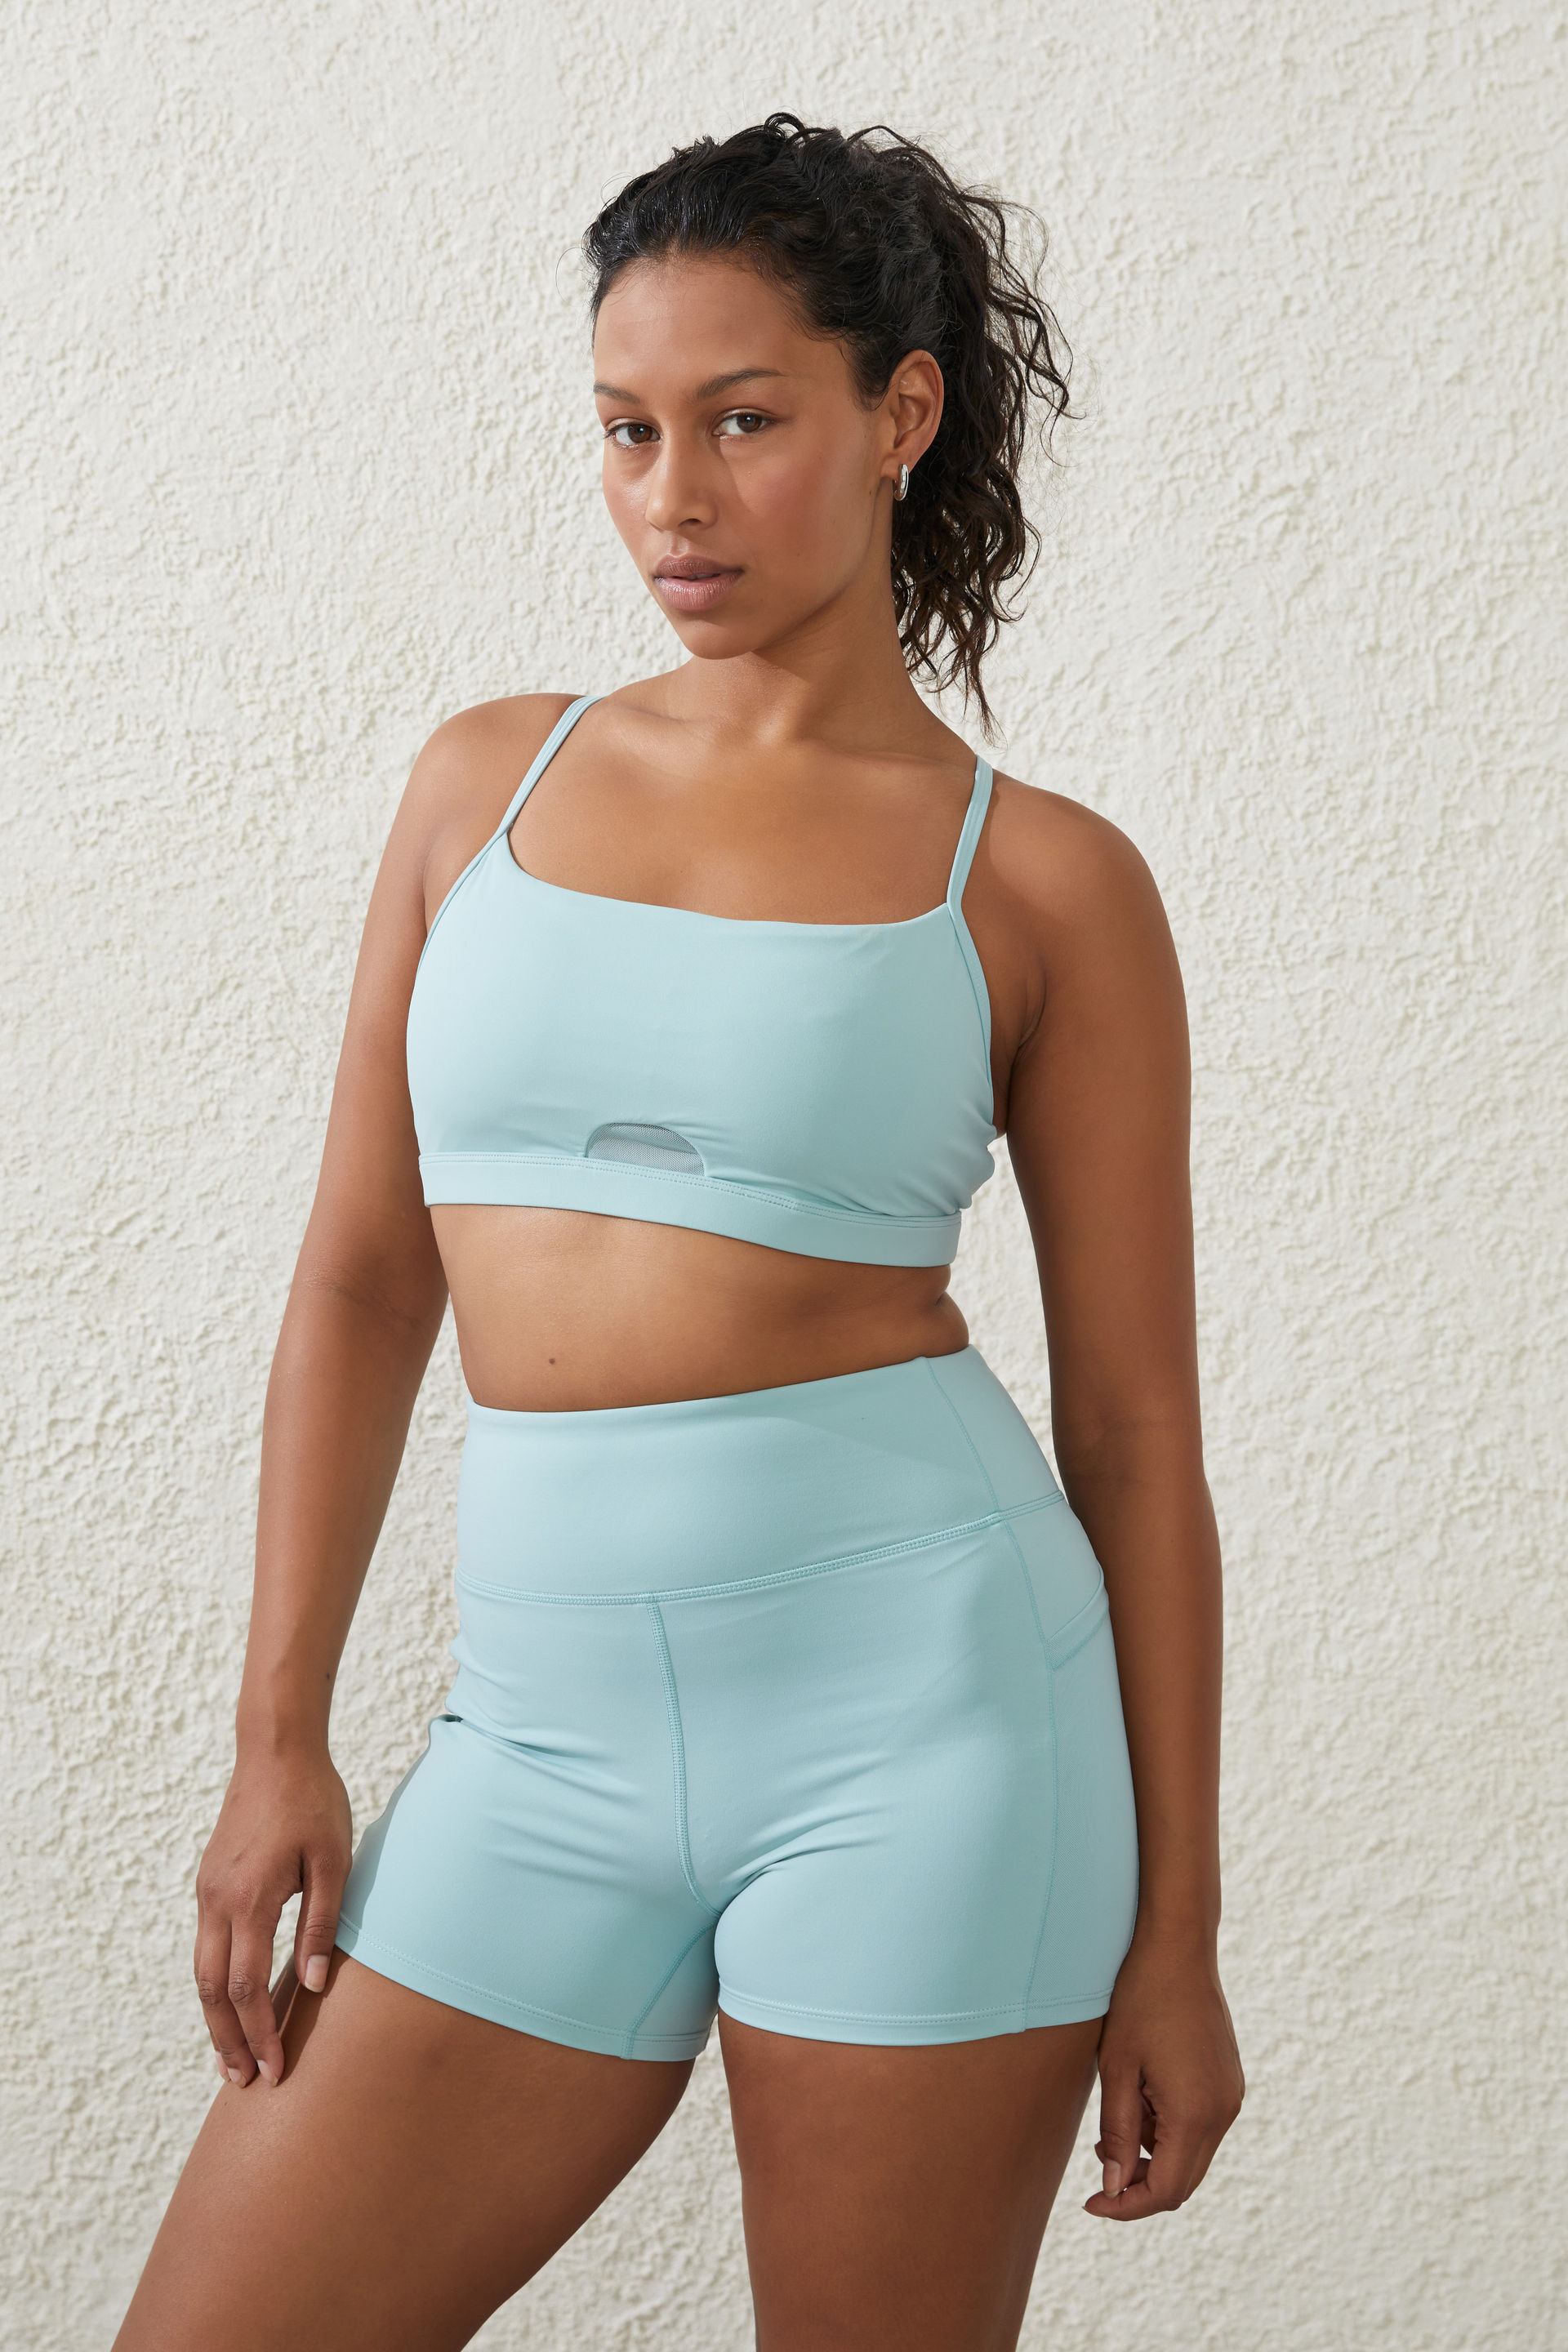 Body - Ultra Luxe Mesh Strappy Crop - Sea glass